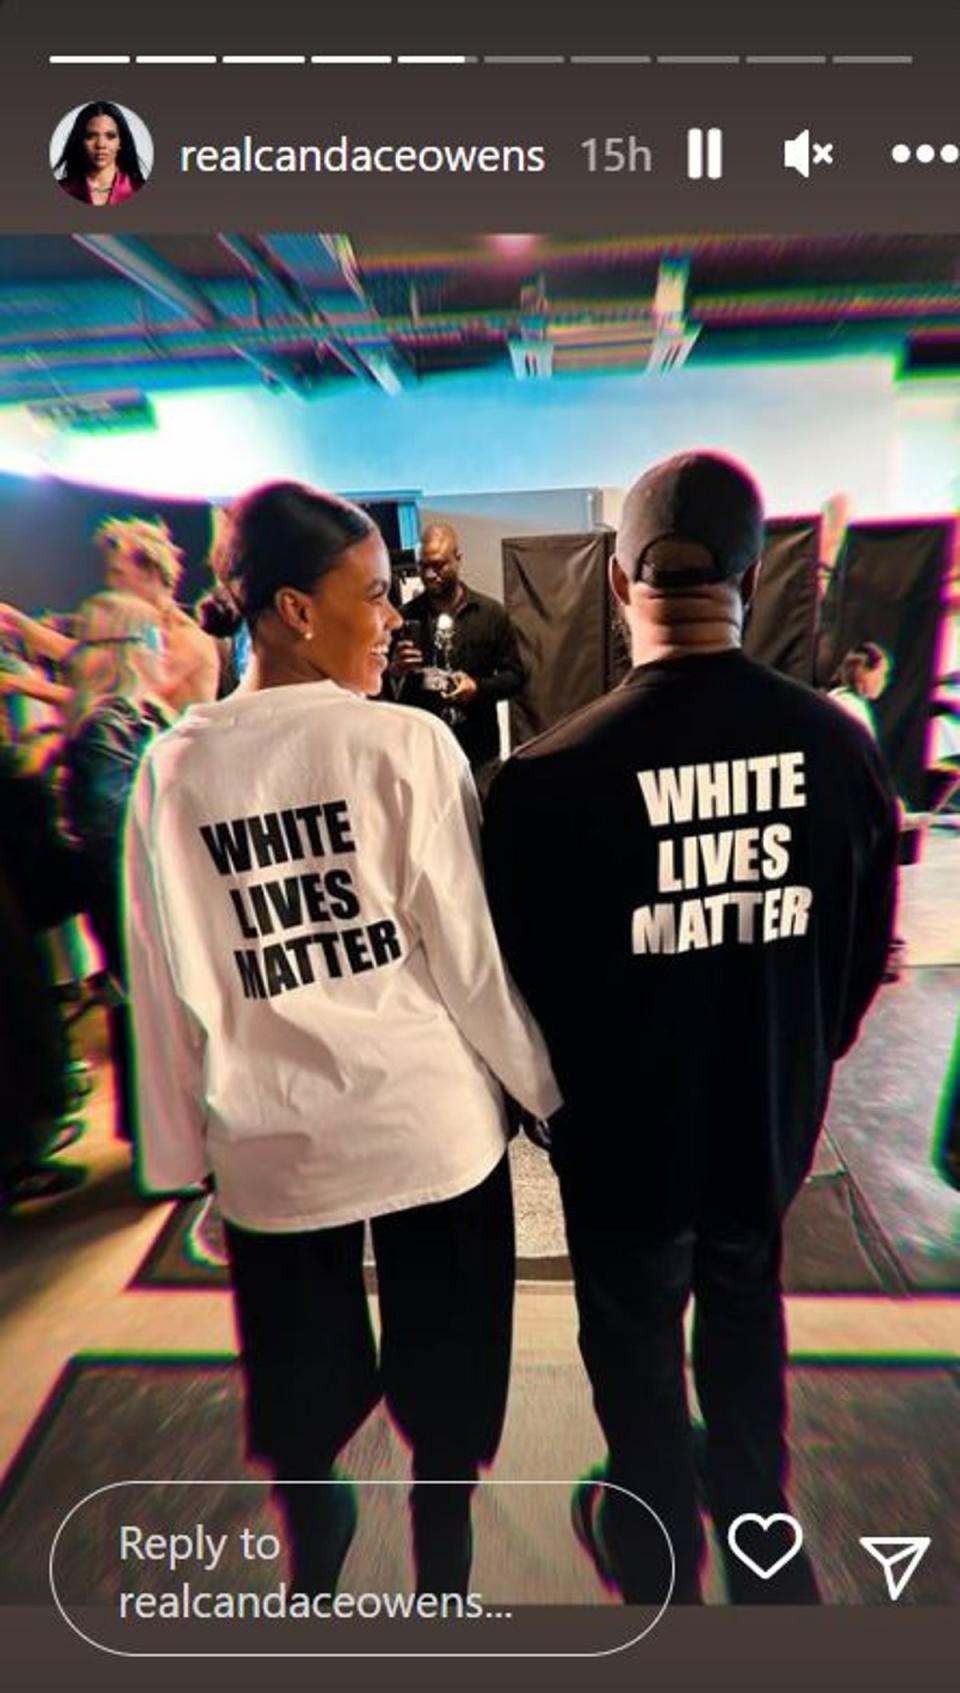 Kanye West posed with Black commentator Candace Owens who wore the same shirt as him in white (Candace Owens)